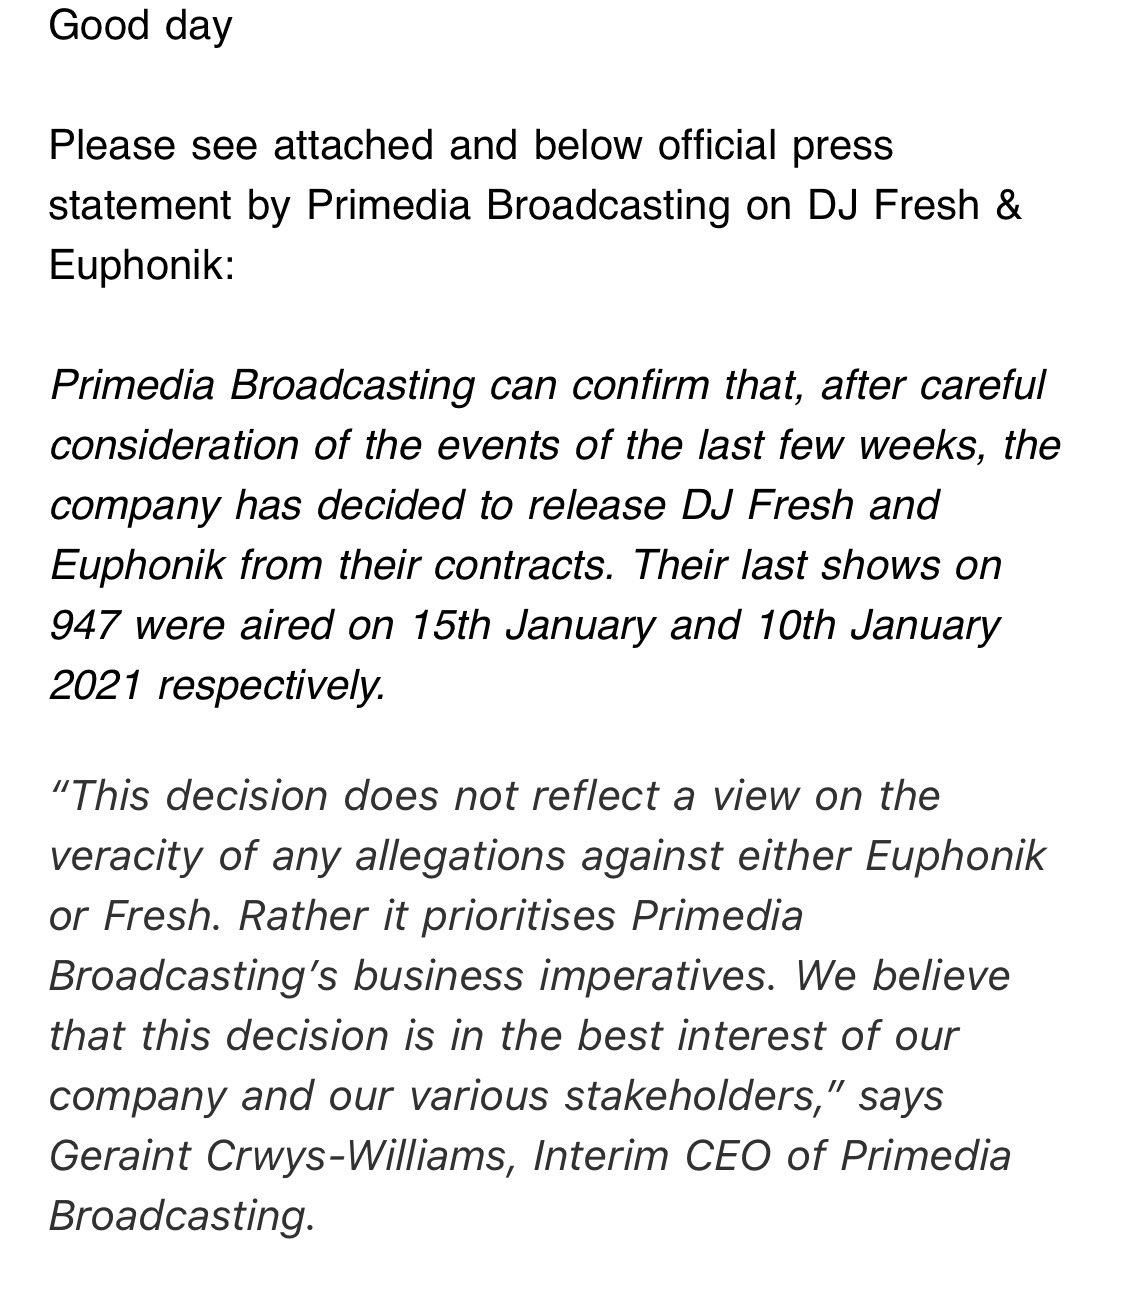 DJ Fresh And Euphonik FIRED From 947 By Primedia